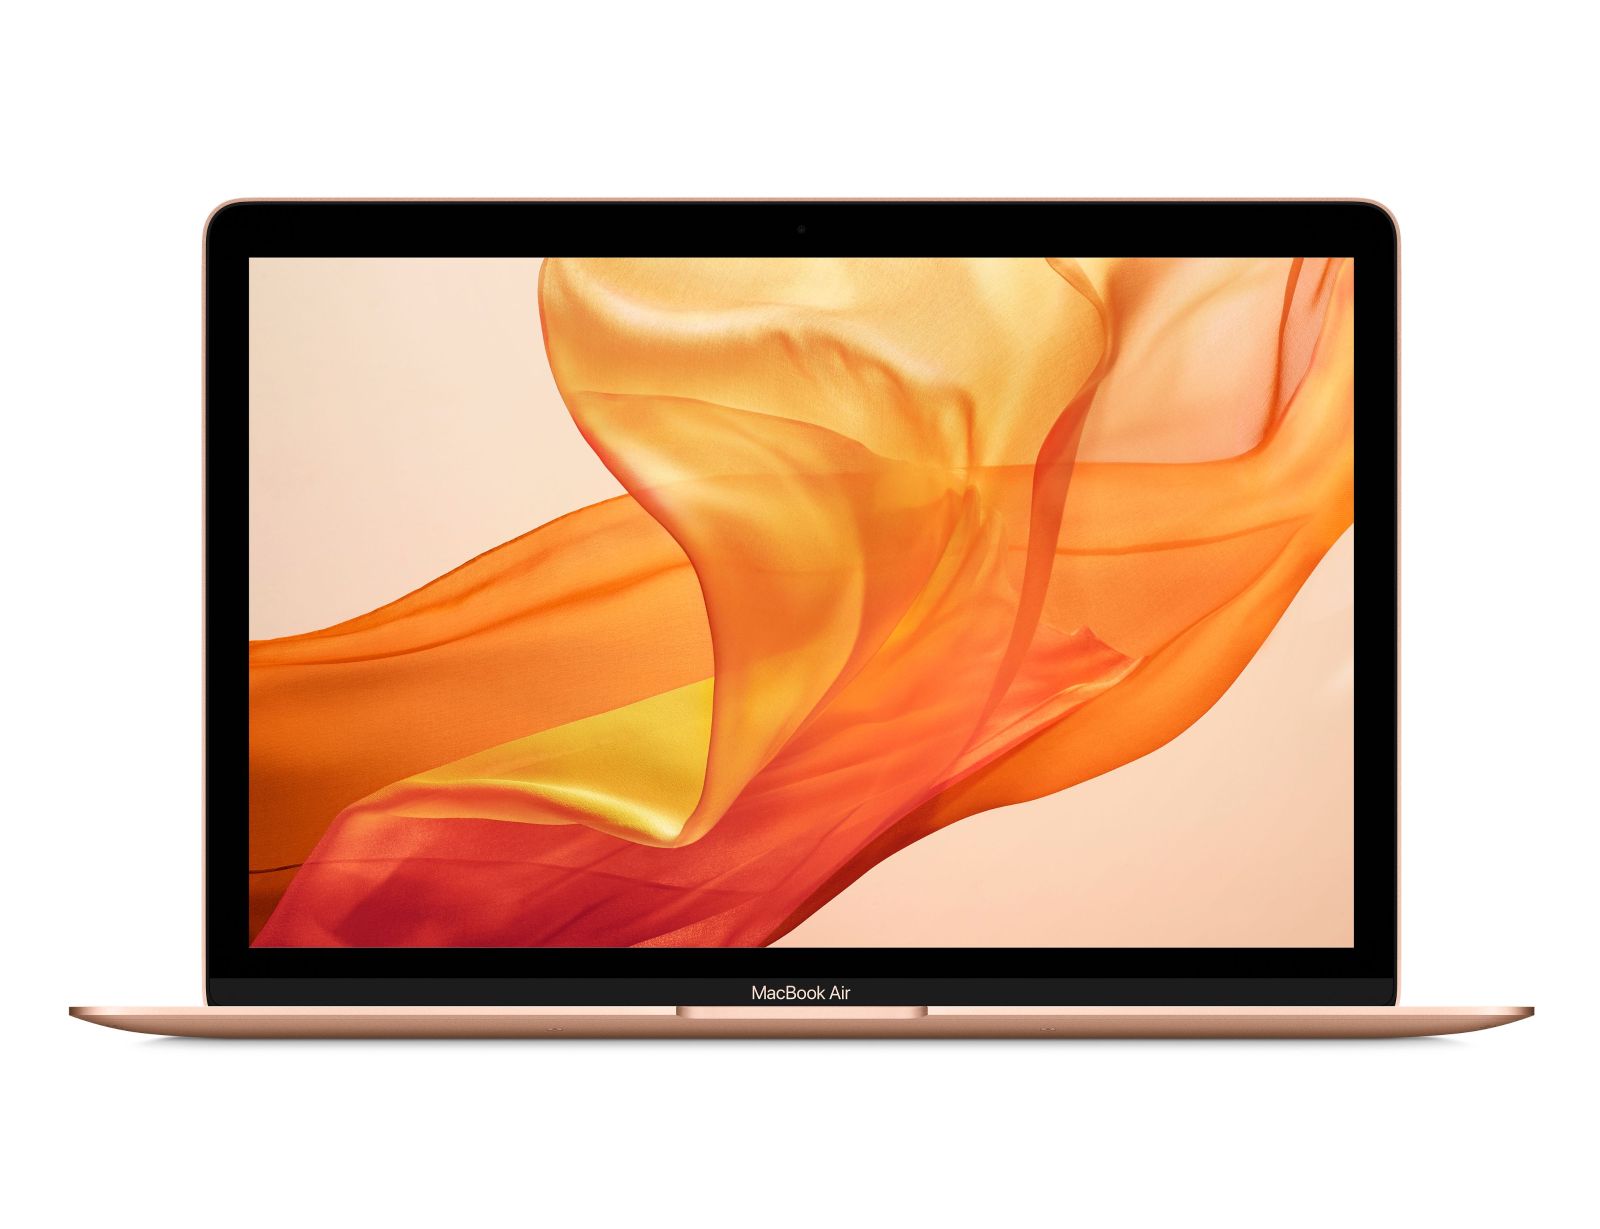 MacBook Air (Retina, 13-inch, 2018) - Technical Specifications